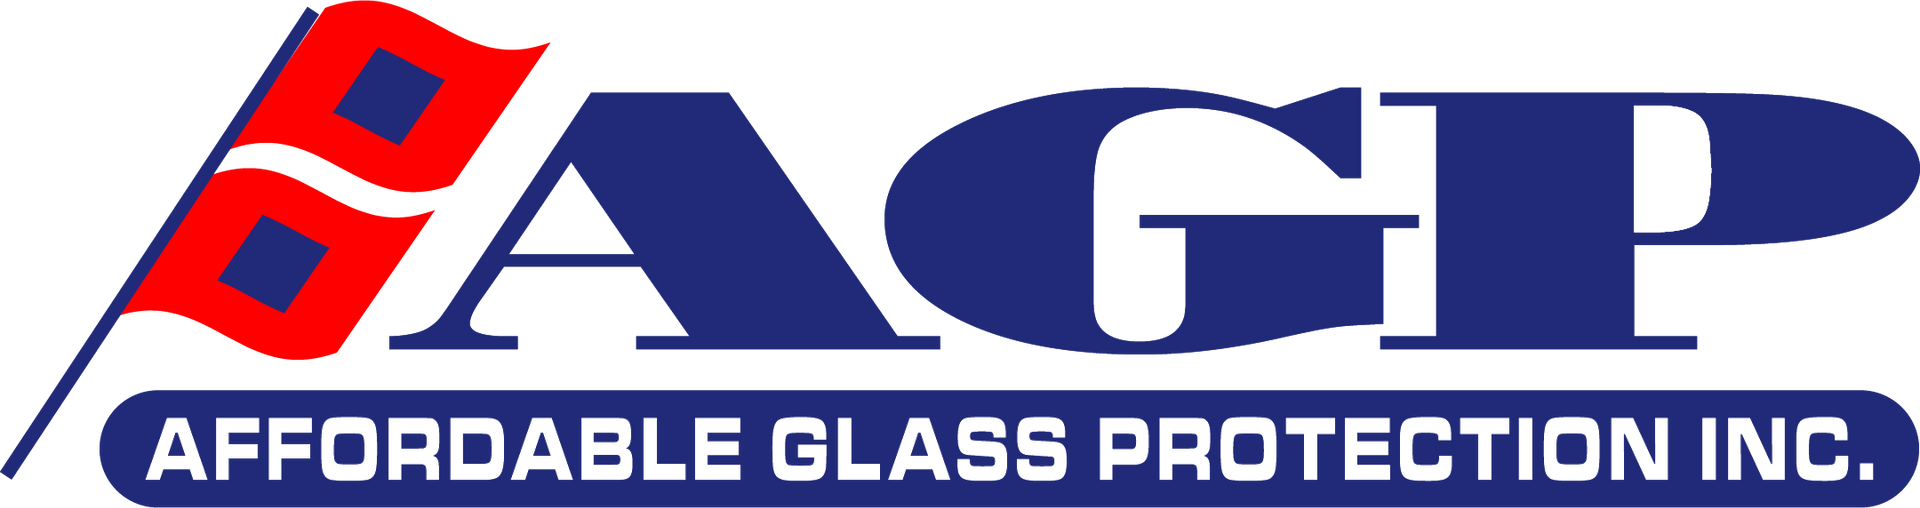 Affordable Glass Protection